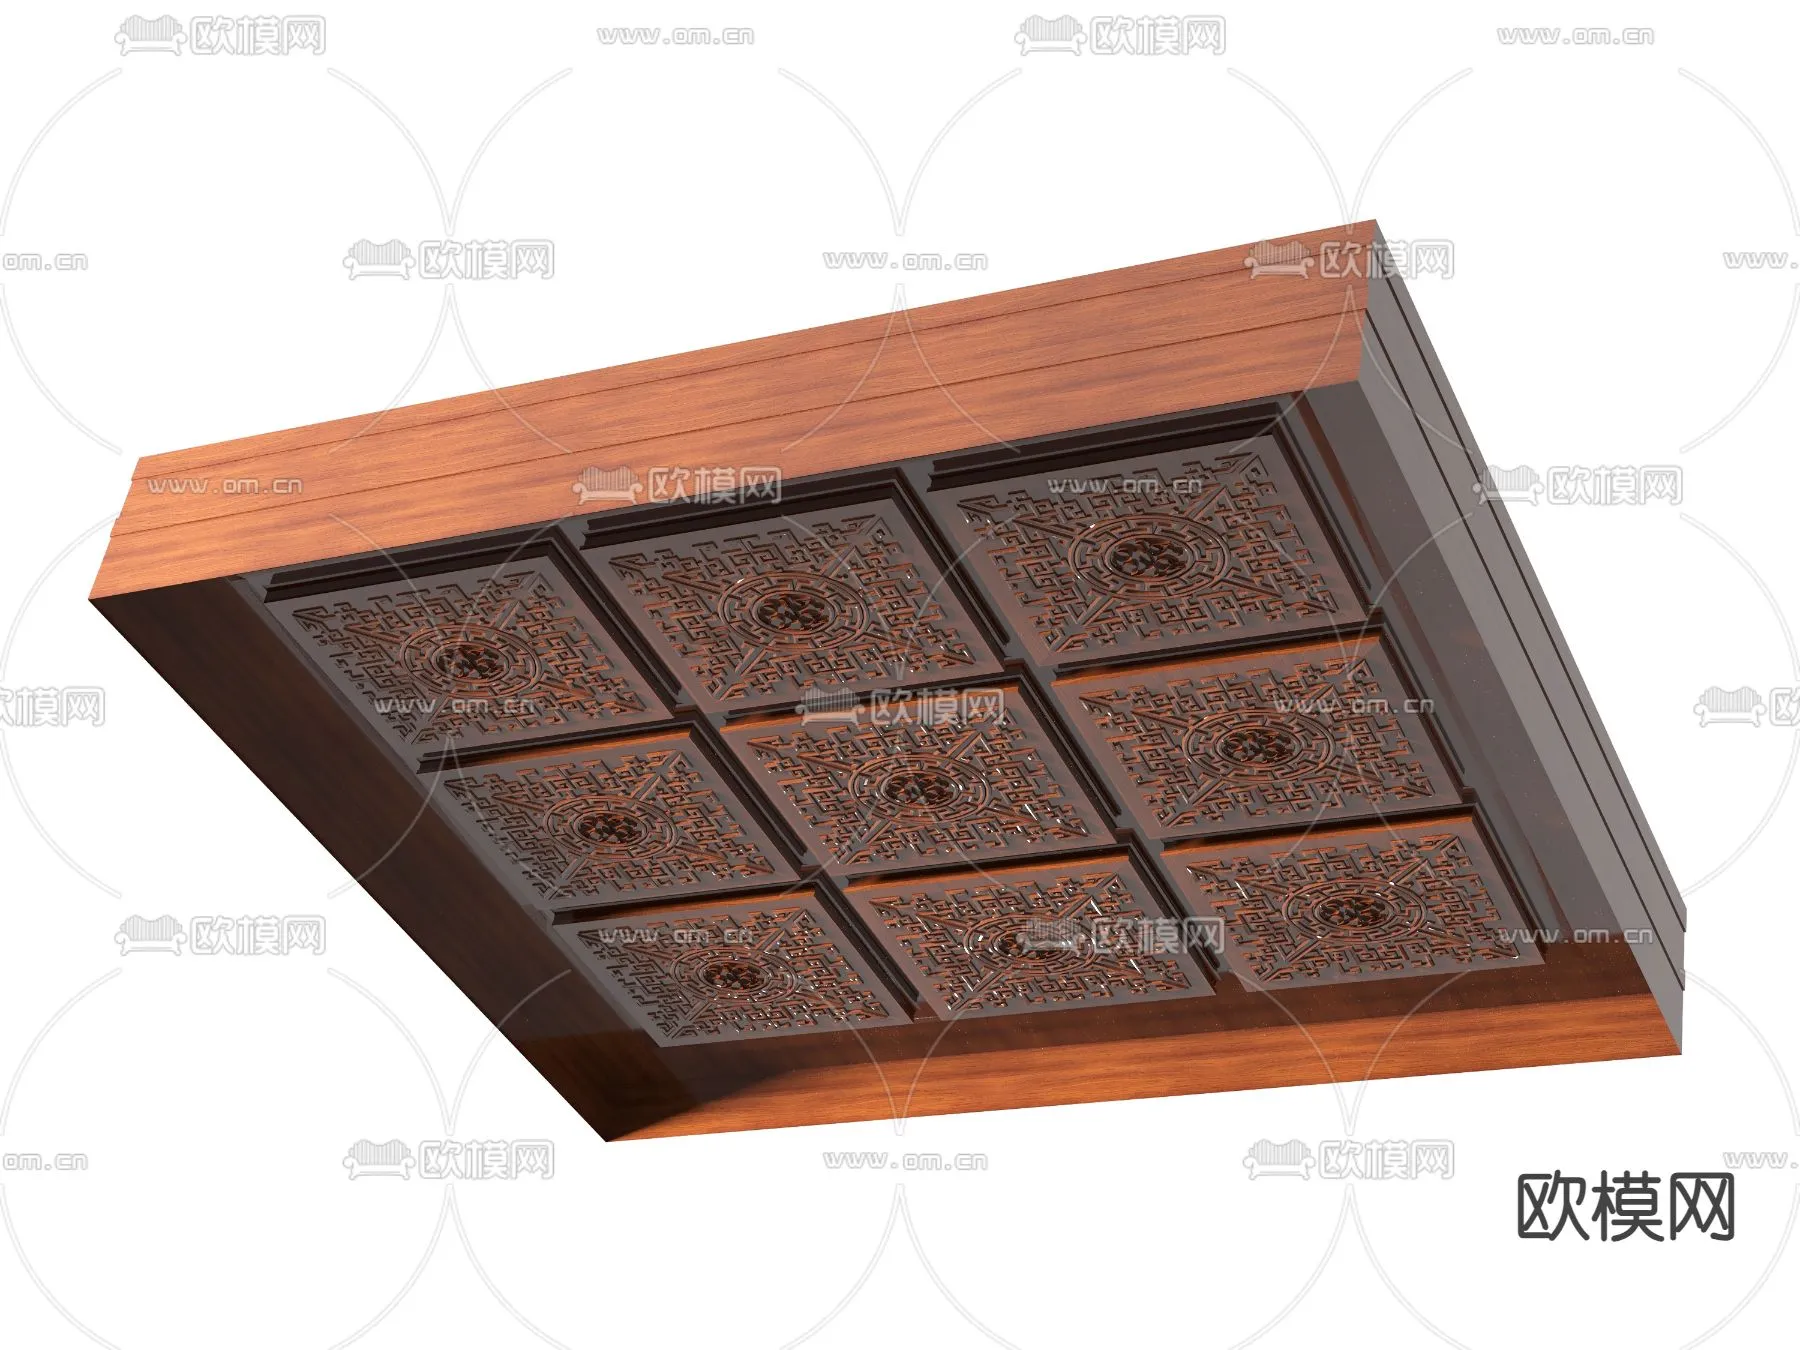 3DS MAX – DETAIL – CEILING – VRAY / CORONA – 3D MODEL – 3210